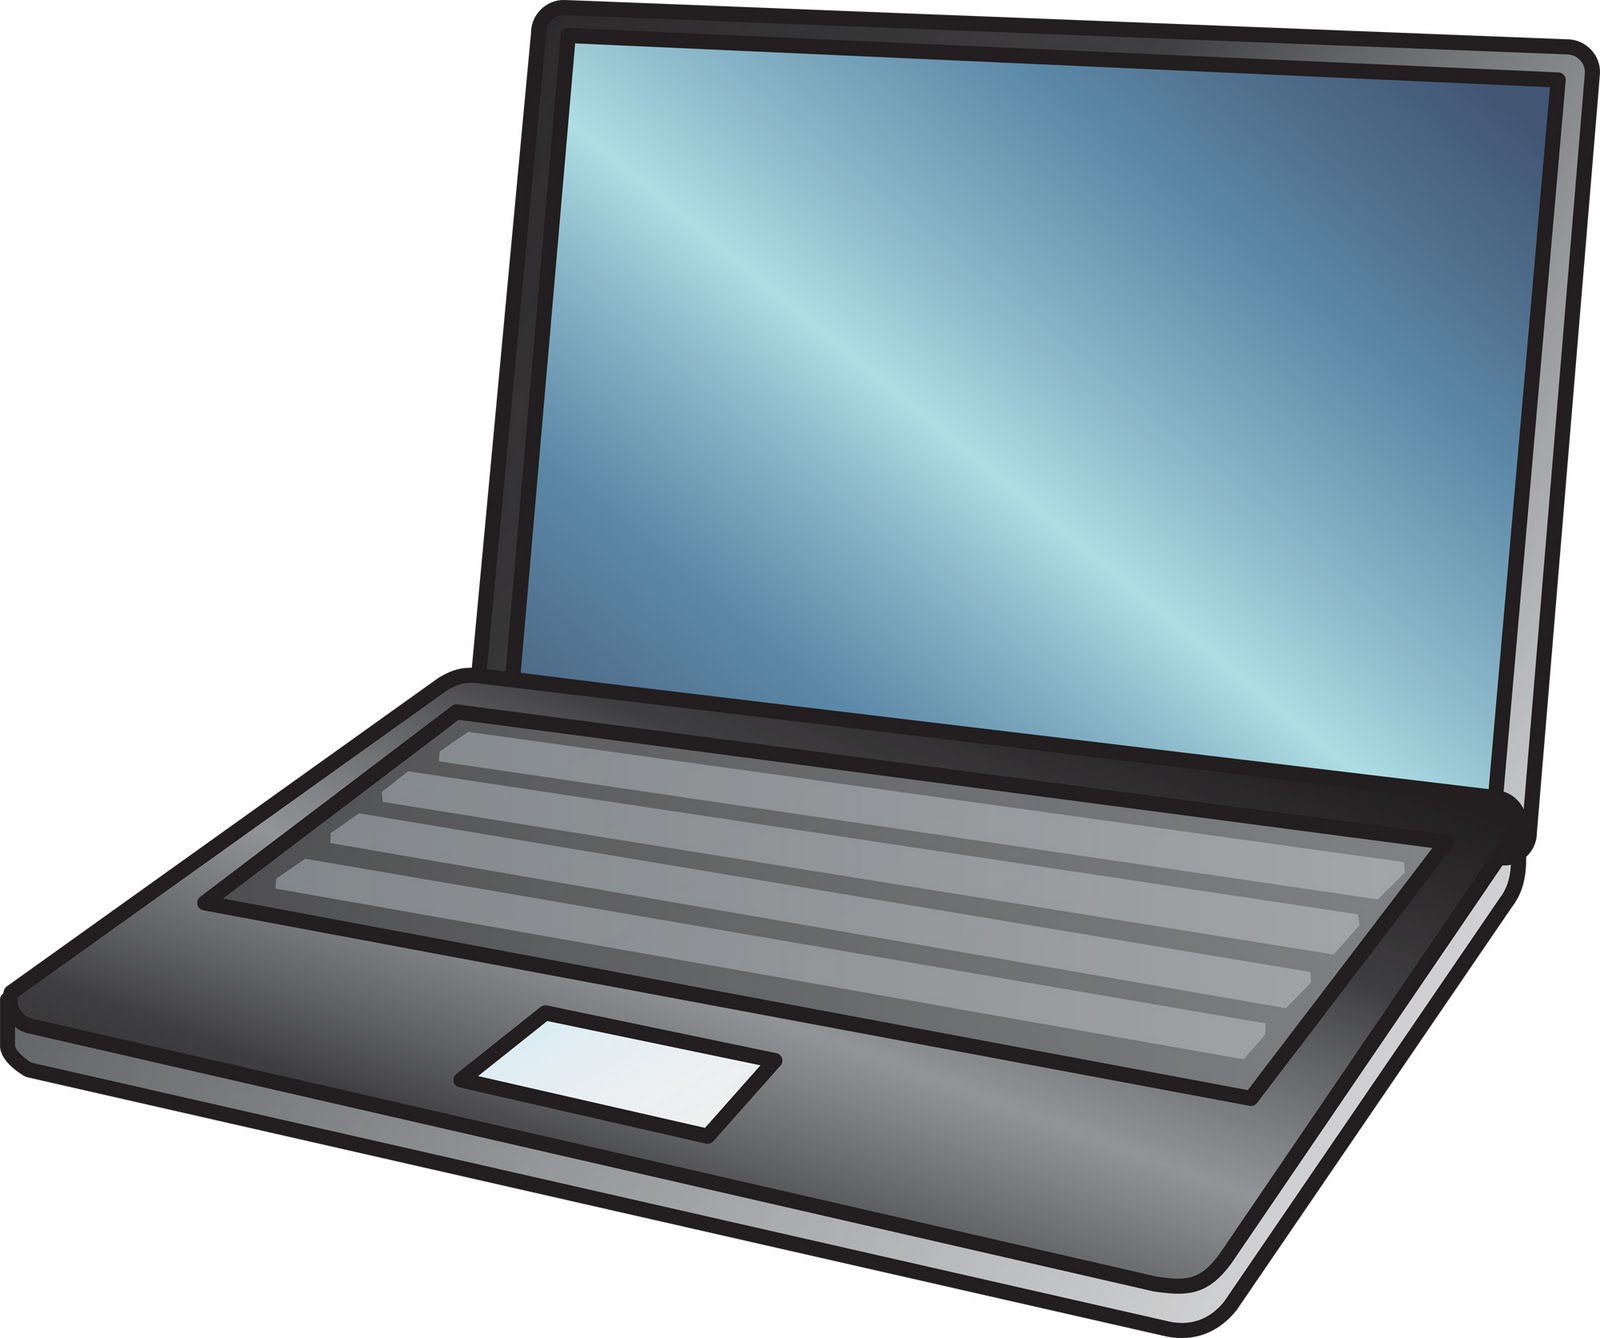 Laptop Images And Notebook Photo Share Submit Clipart